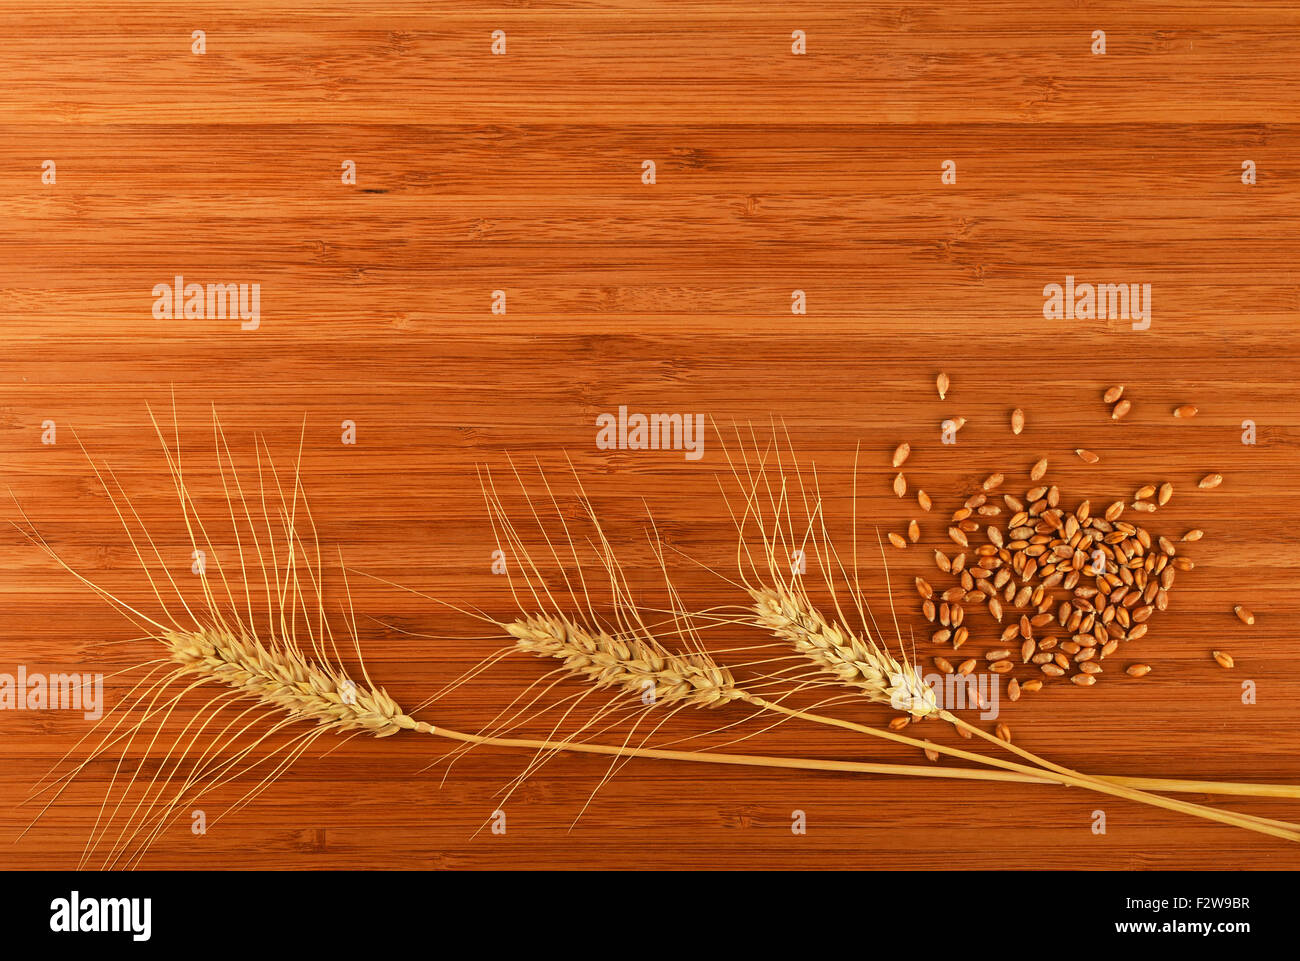 Wooden bamboo cutting board with three wheat ears and handful of ripe grains, add your text Stock Photo